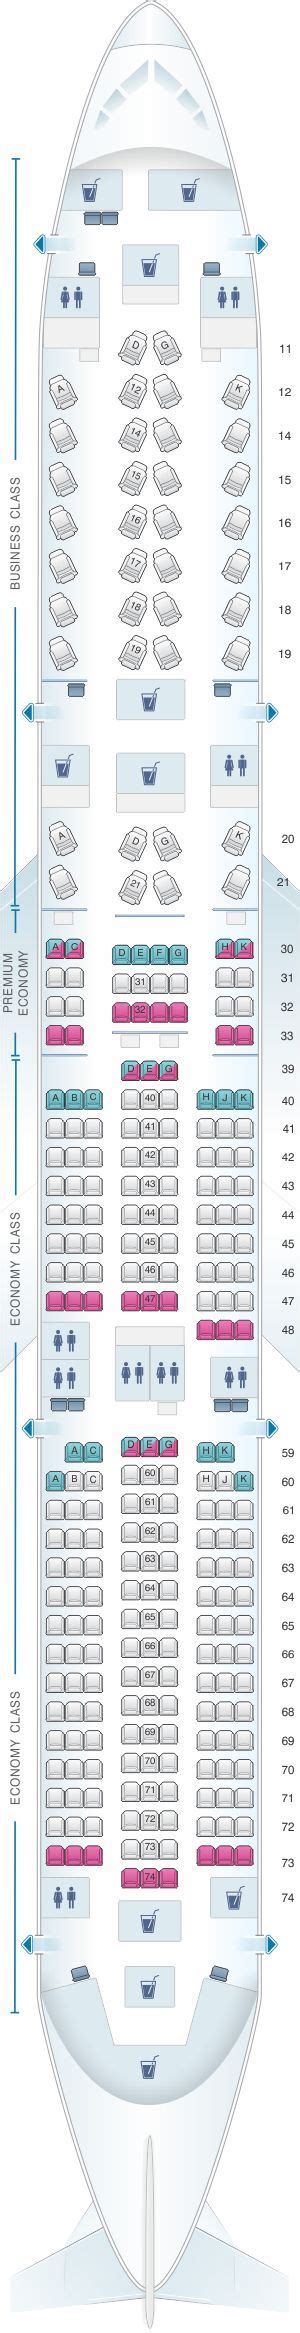 Seat Map Cathay Pacific Airways Airbus A350 900 35g Air India